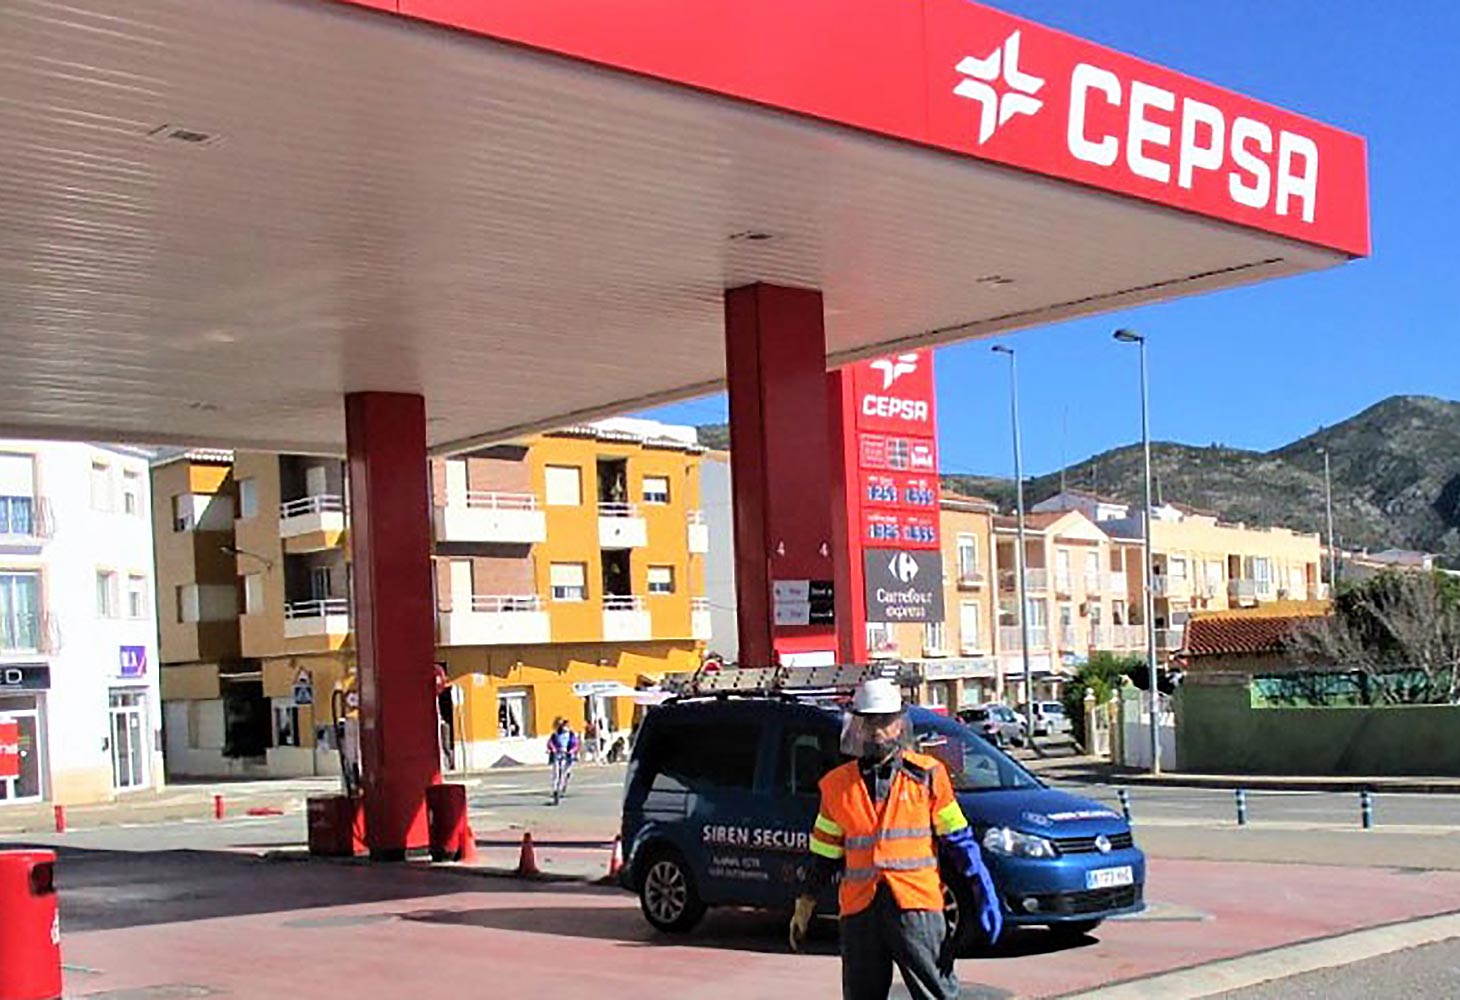 Cepsa taps SGS to monitor fuel quality in Spain and Portugal